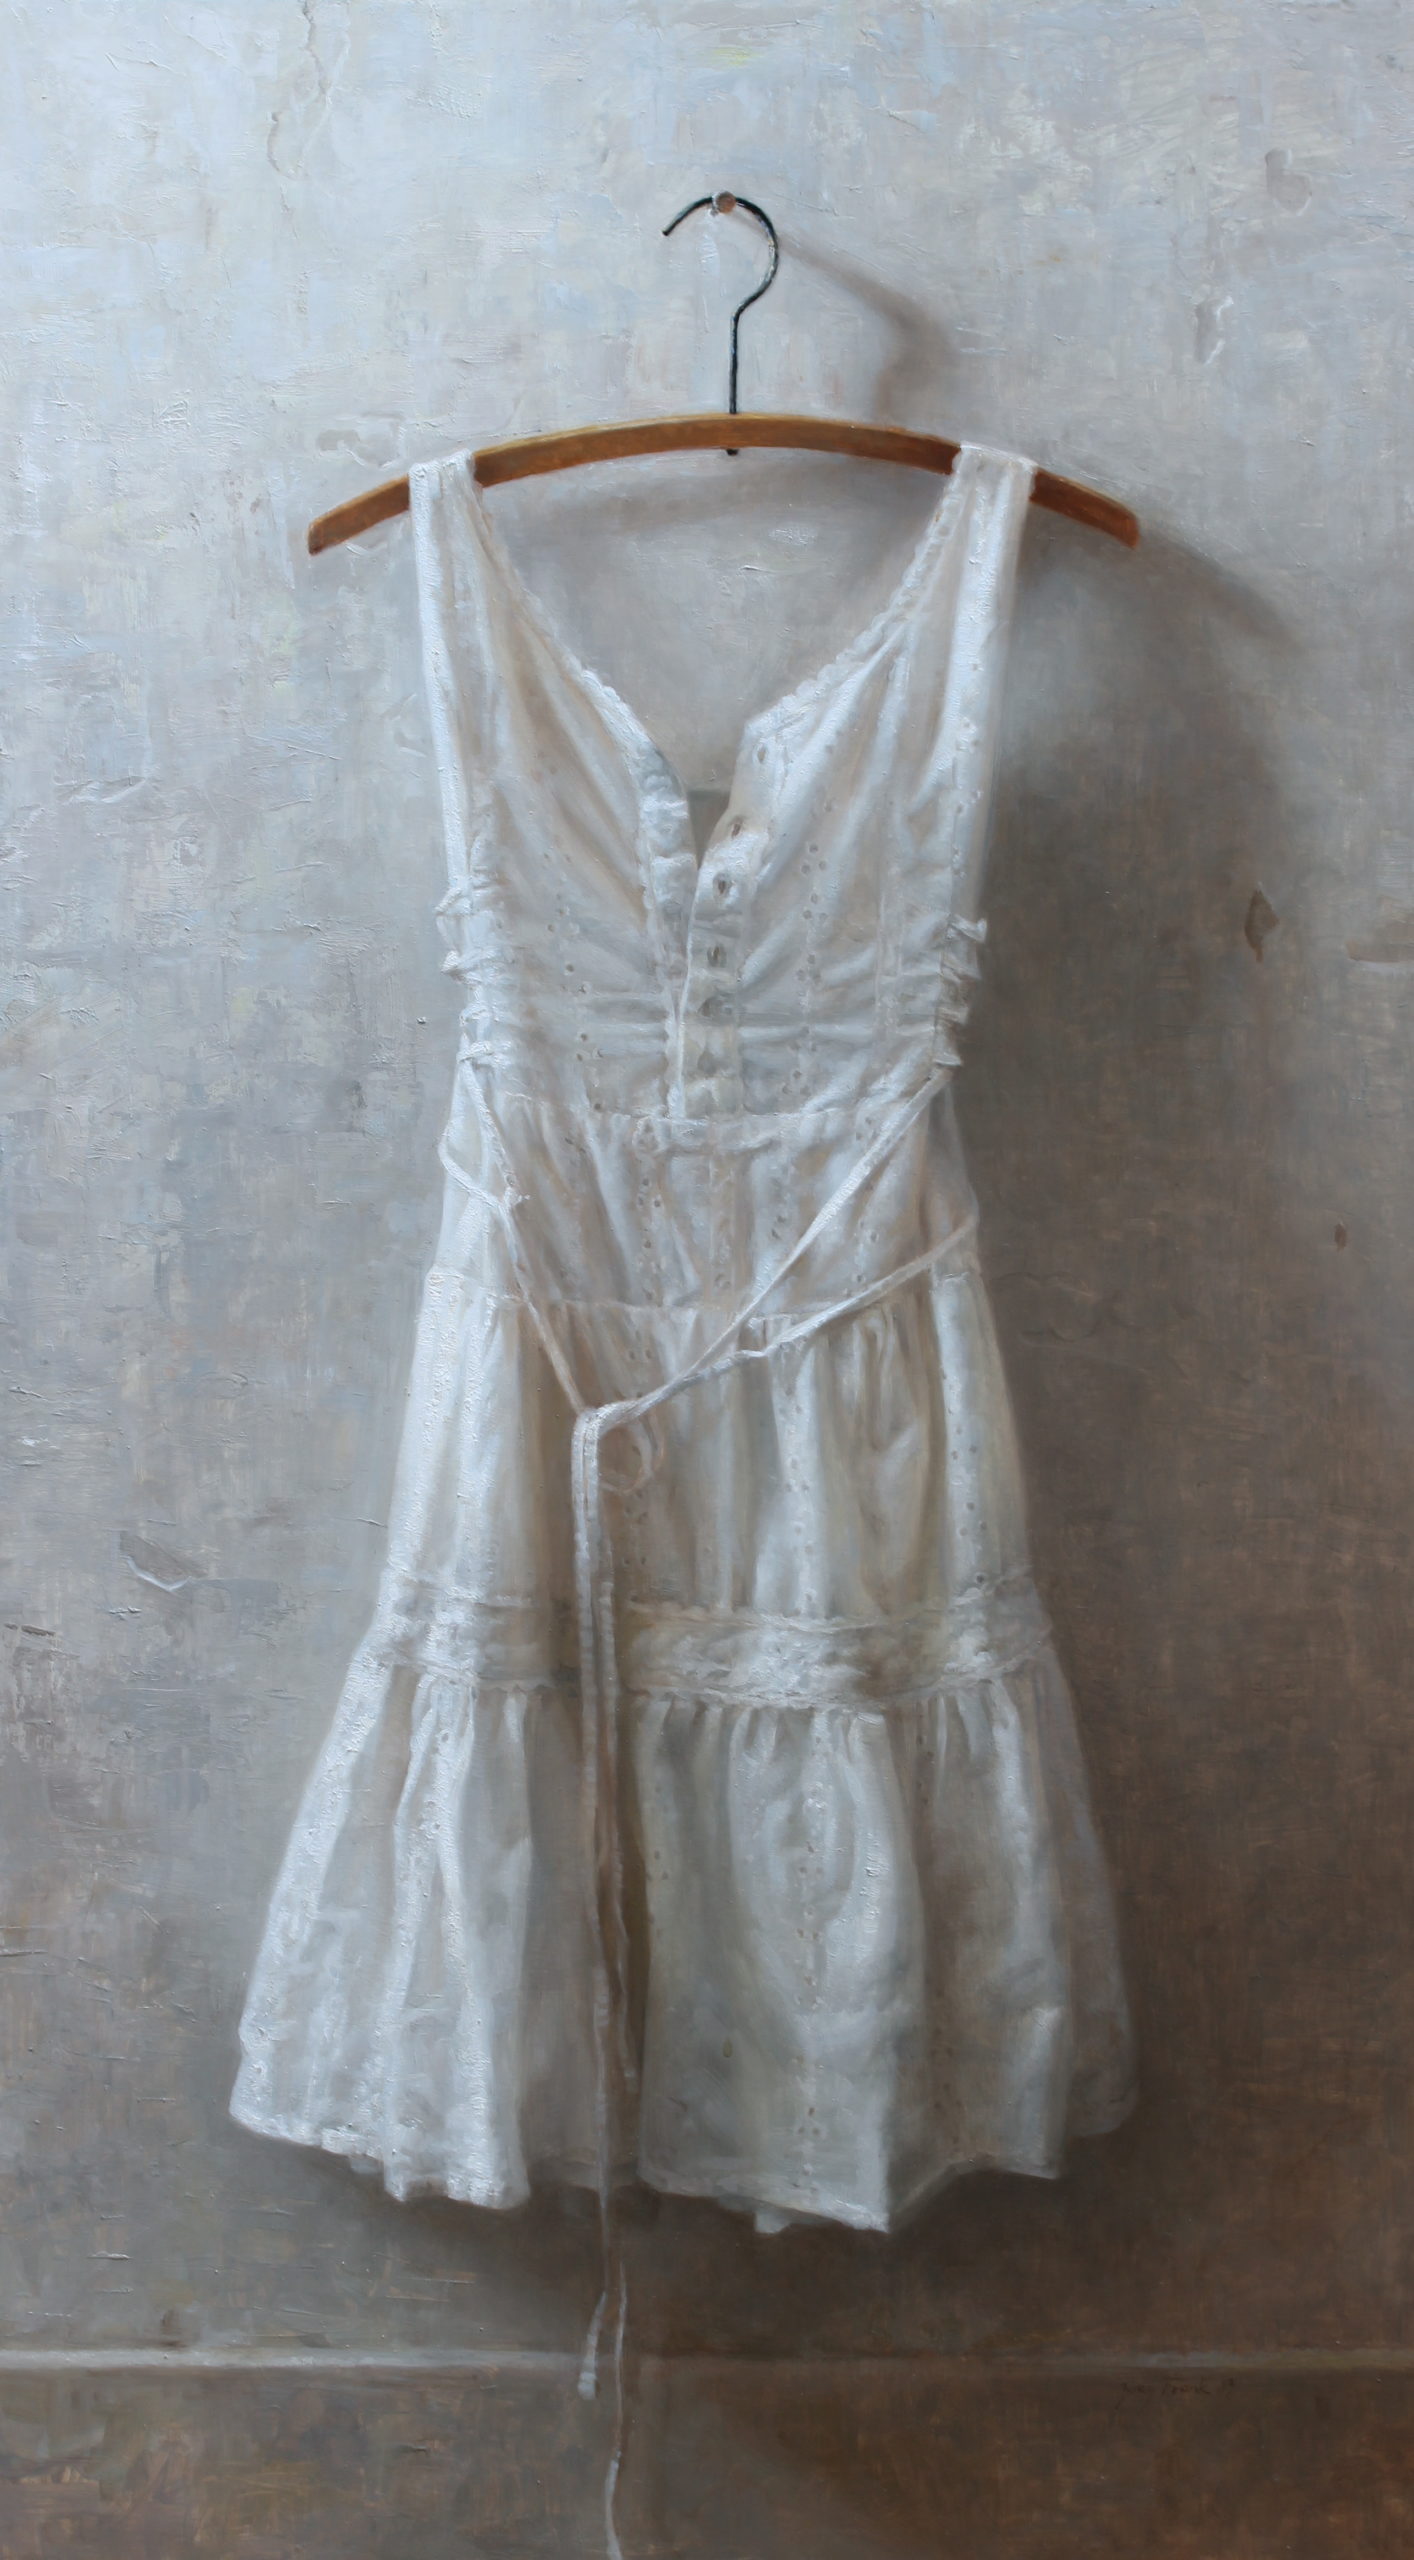 Contemporary realism painting of a dress